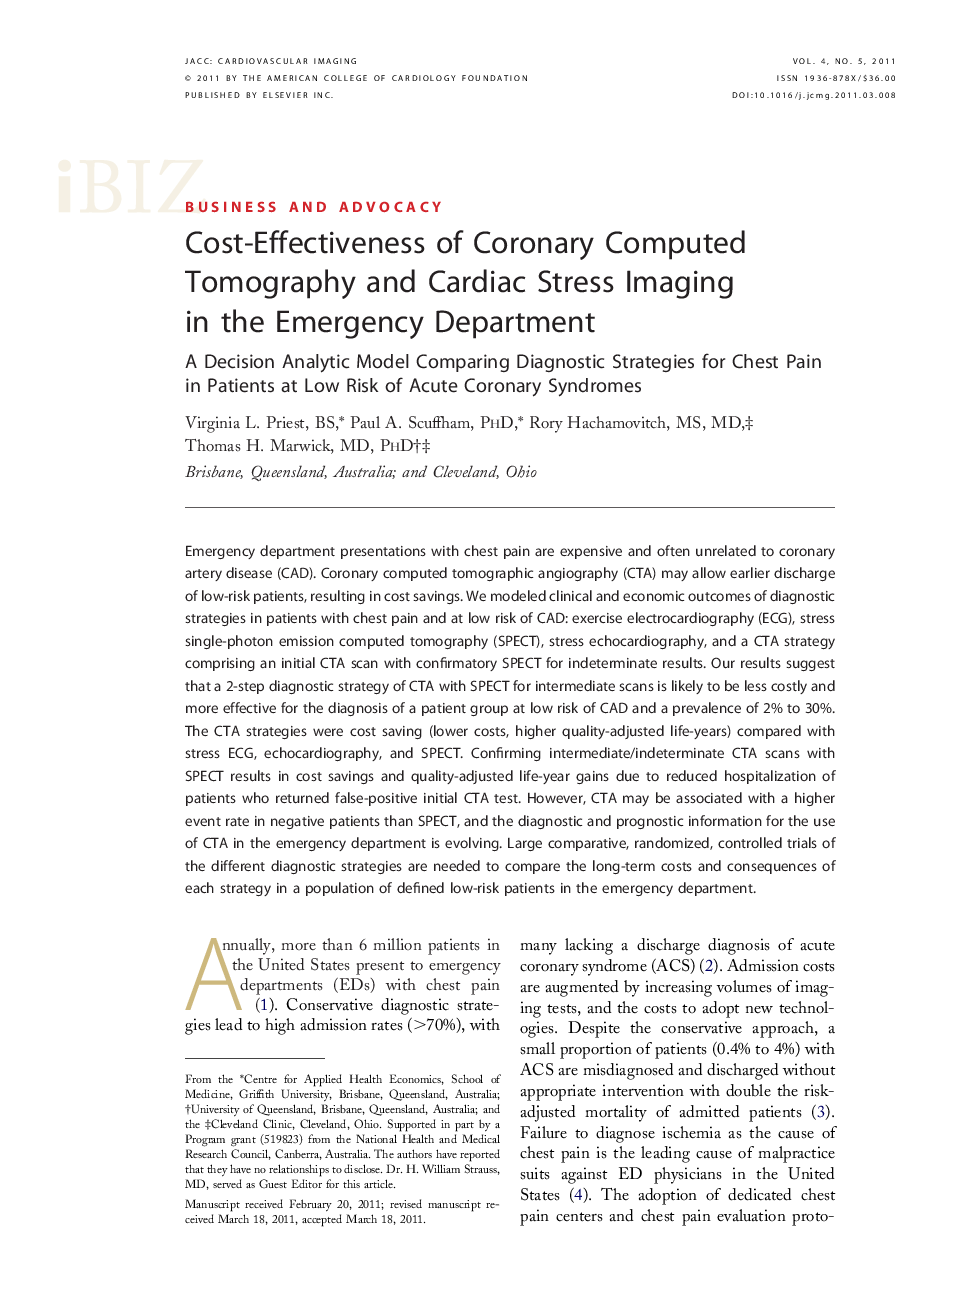 Cost-Effectiveness of Coronary Computed Tomography and Cardiac Stress Imaging in the Emergency Department : A Decision Analytic Model Comparing Diagnostic Strategies for Chest Pain in Patients at Low Risk of Acute Coronary Syndromes